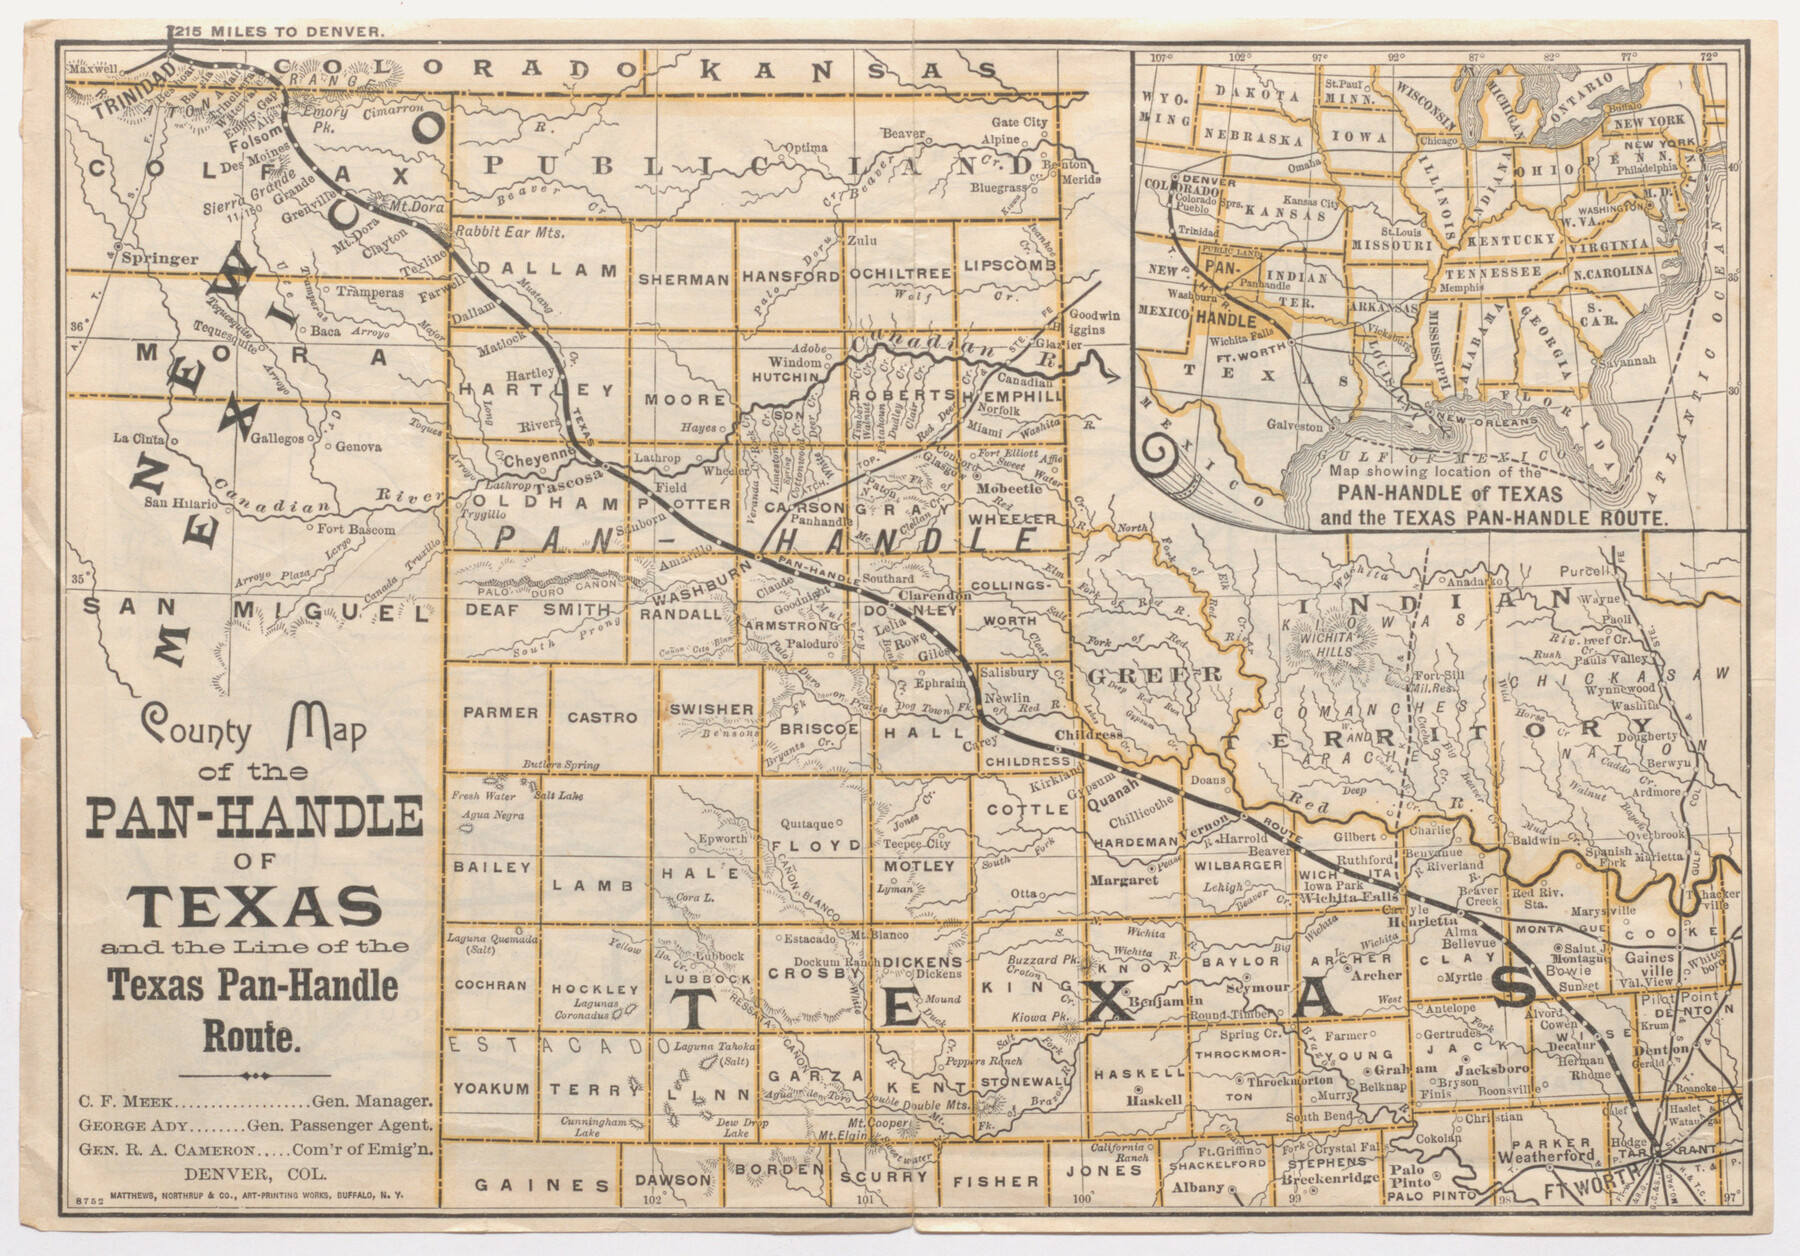 95888, County Map of the Pan-Handle of Texas and the line of the Texas Pan-Handle Route, Cobb Digital Map Collection - 1